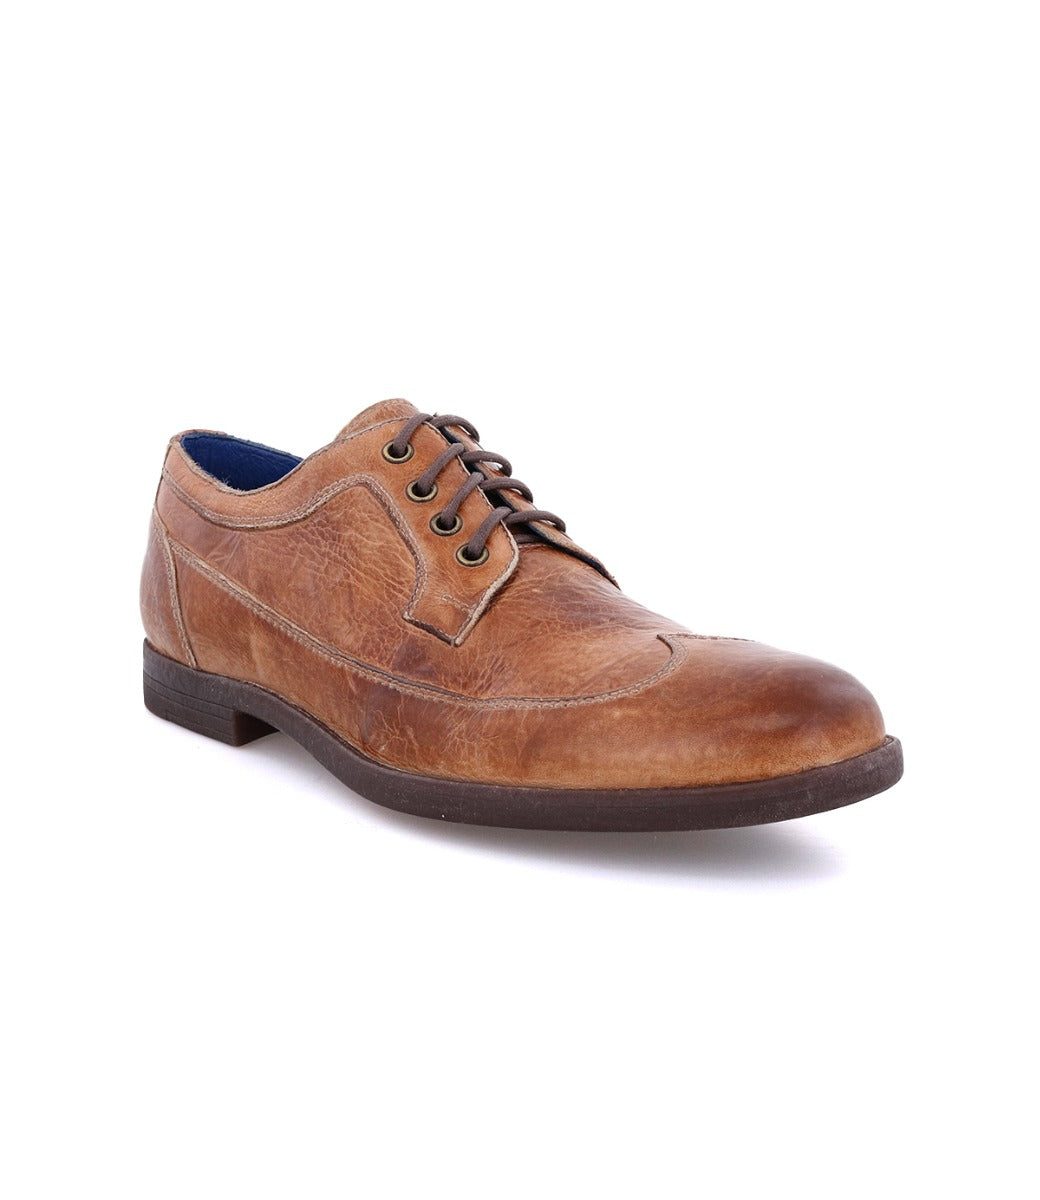 A Sandro men's brown lace up shoe by Bed Stu.